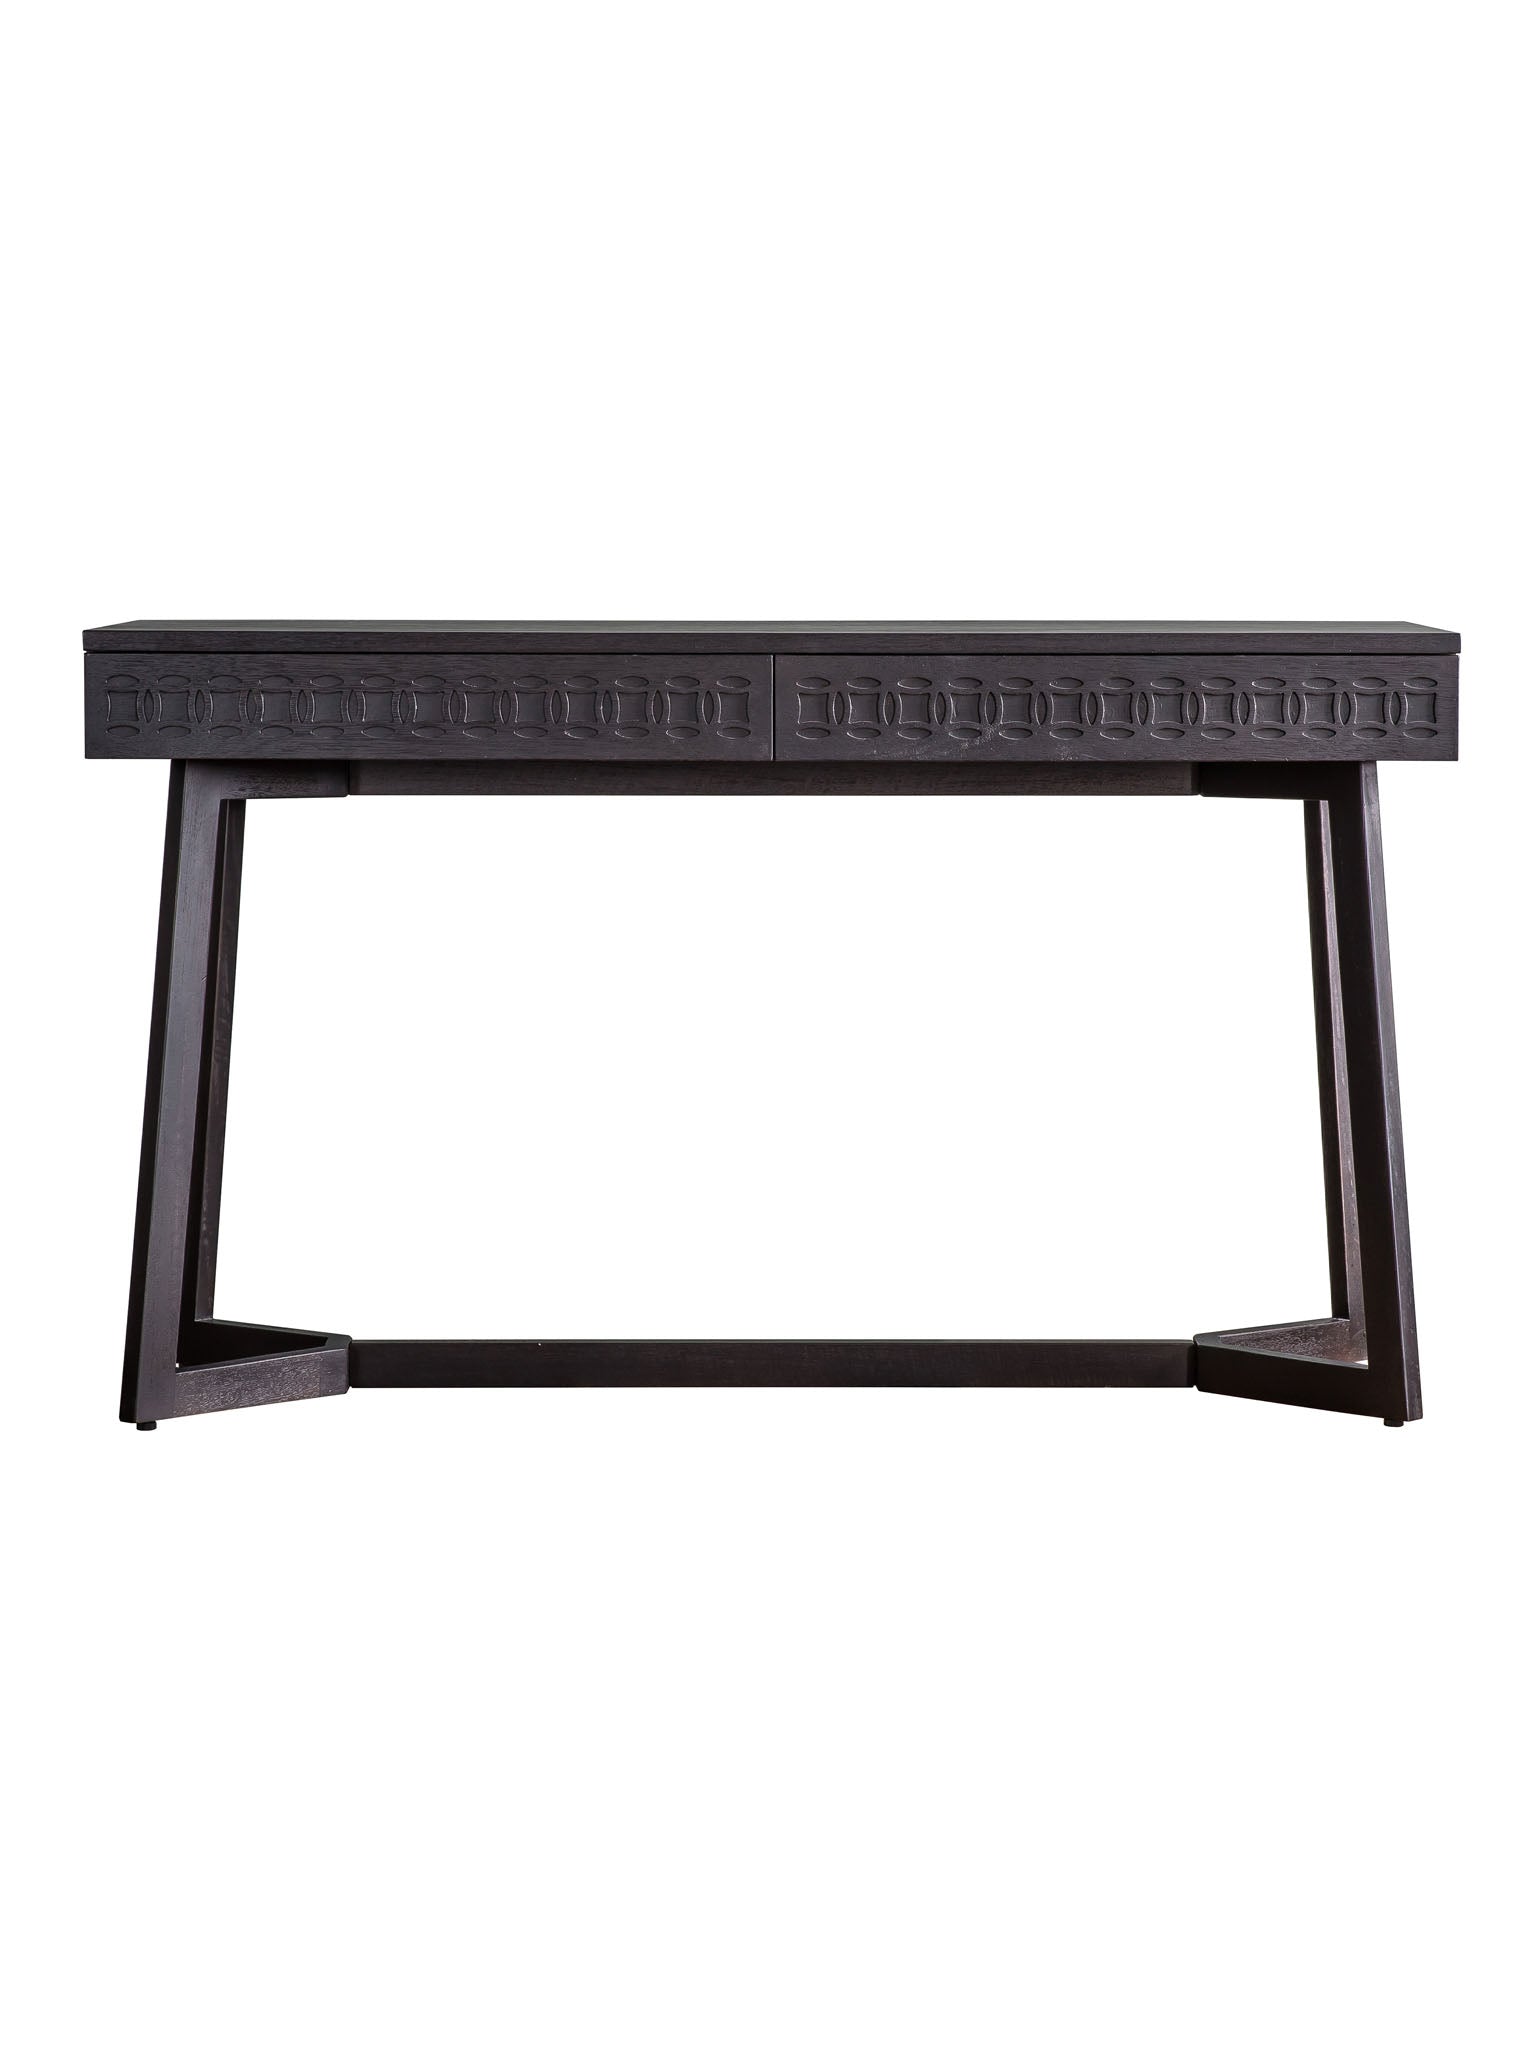 Black two drawer desk with patterned frieze